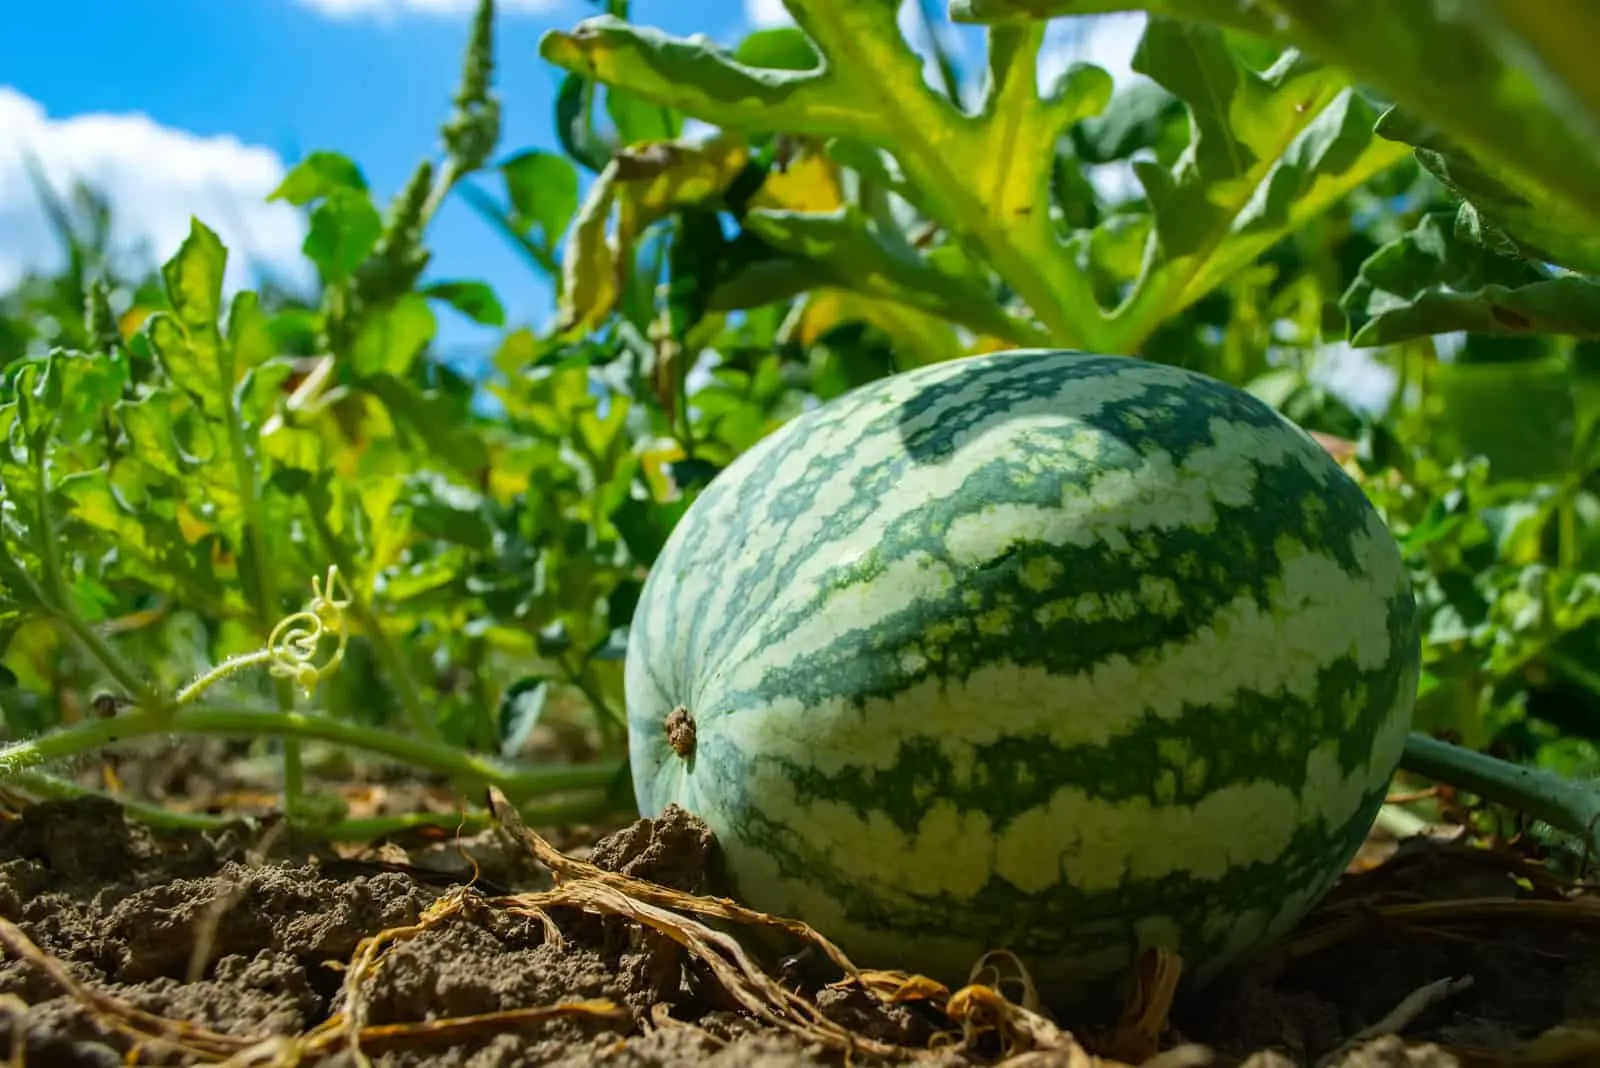 striped watermelon on the field during ripening